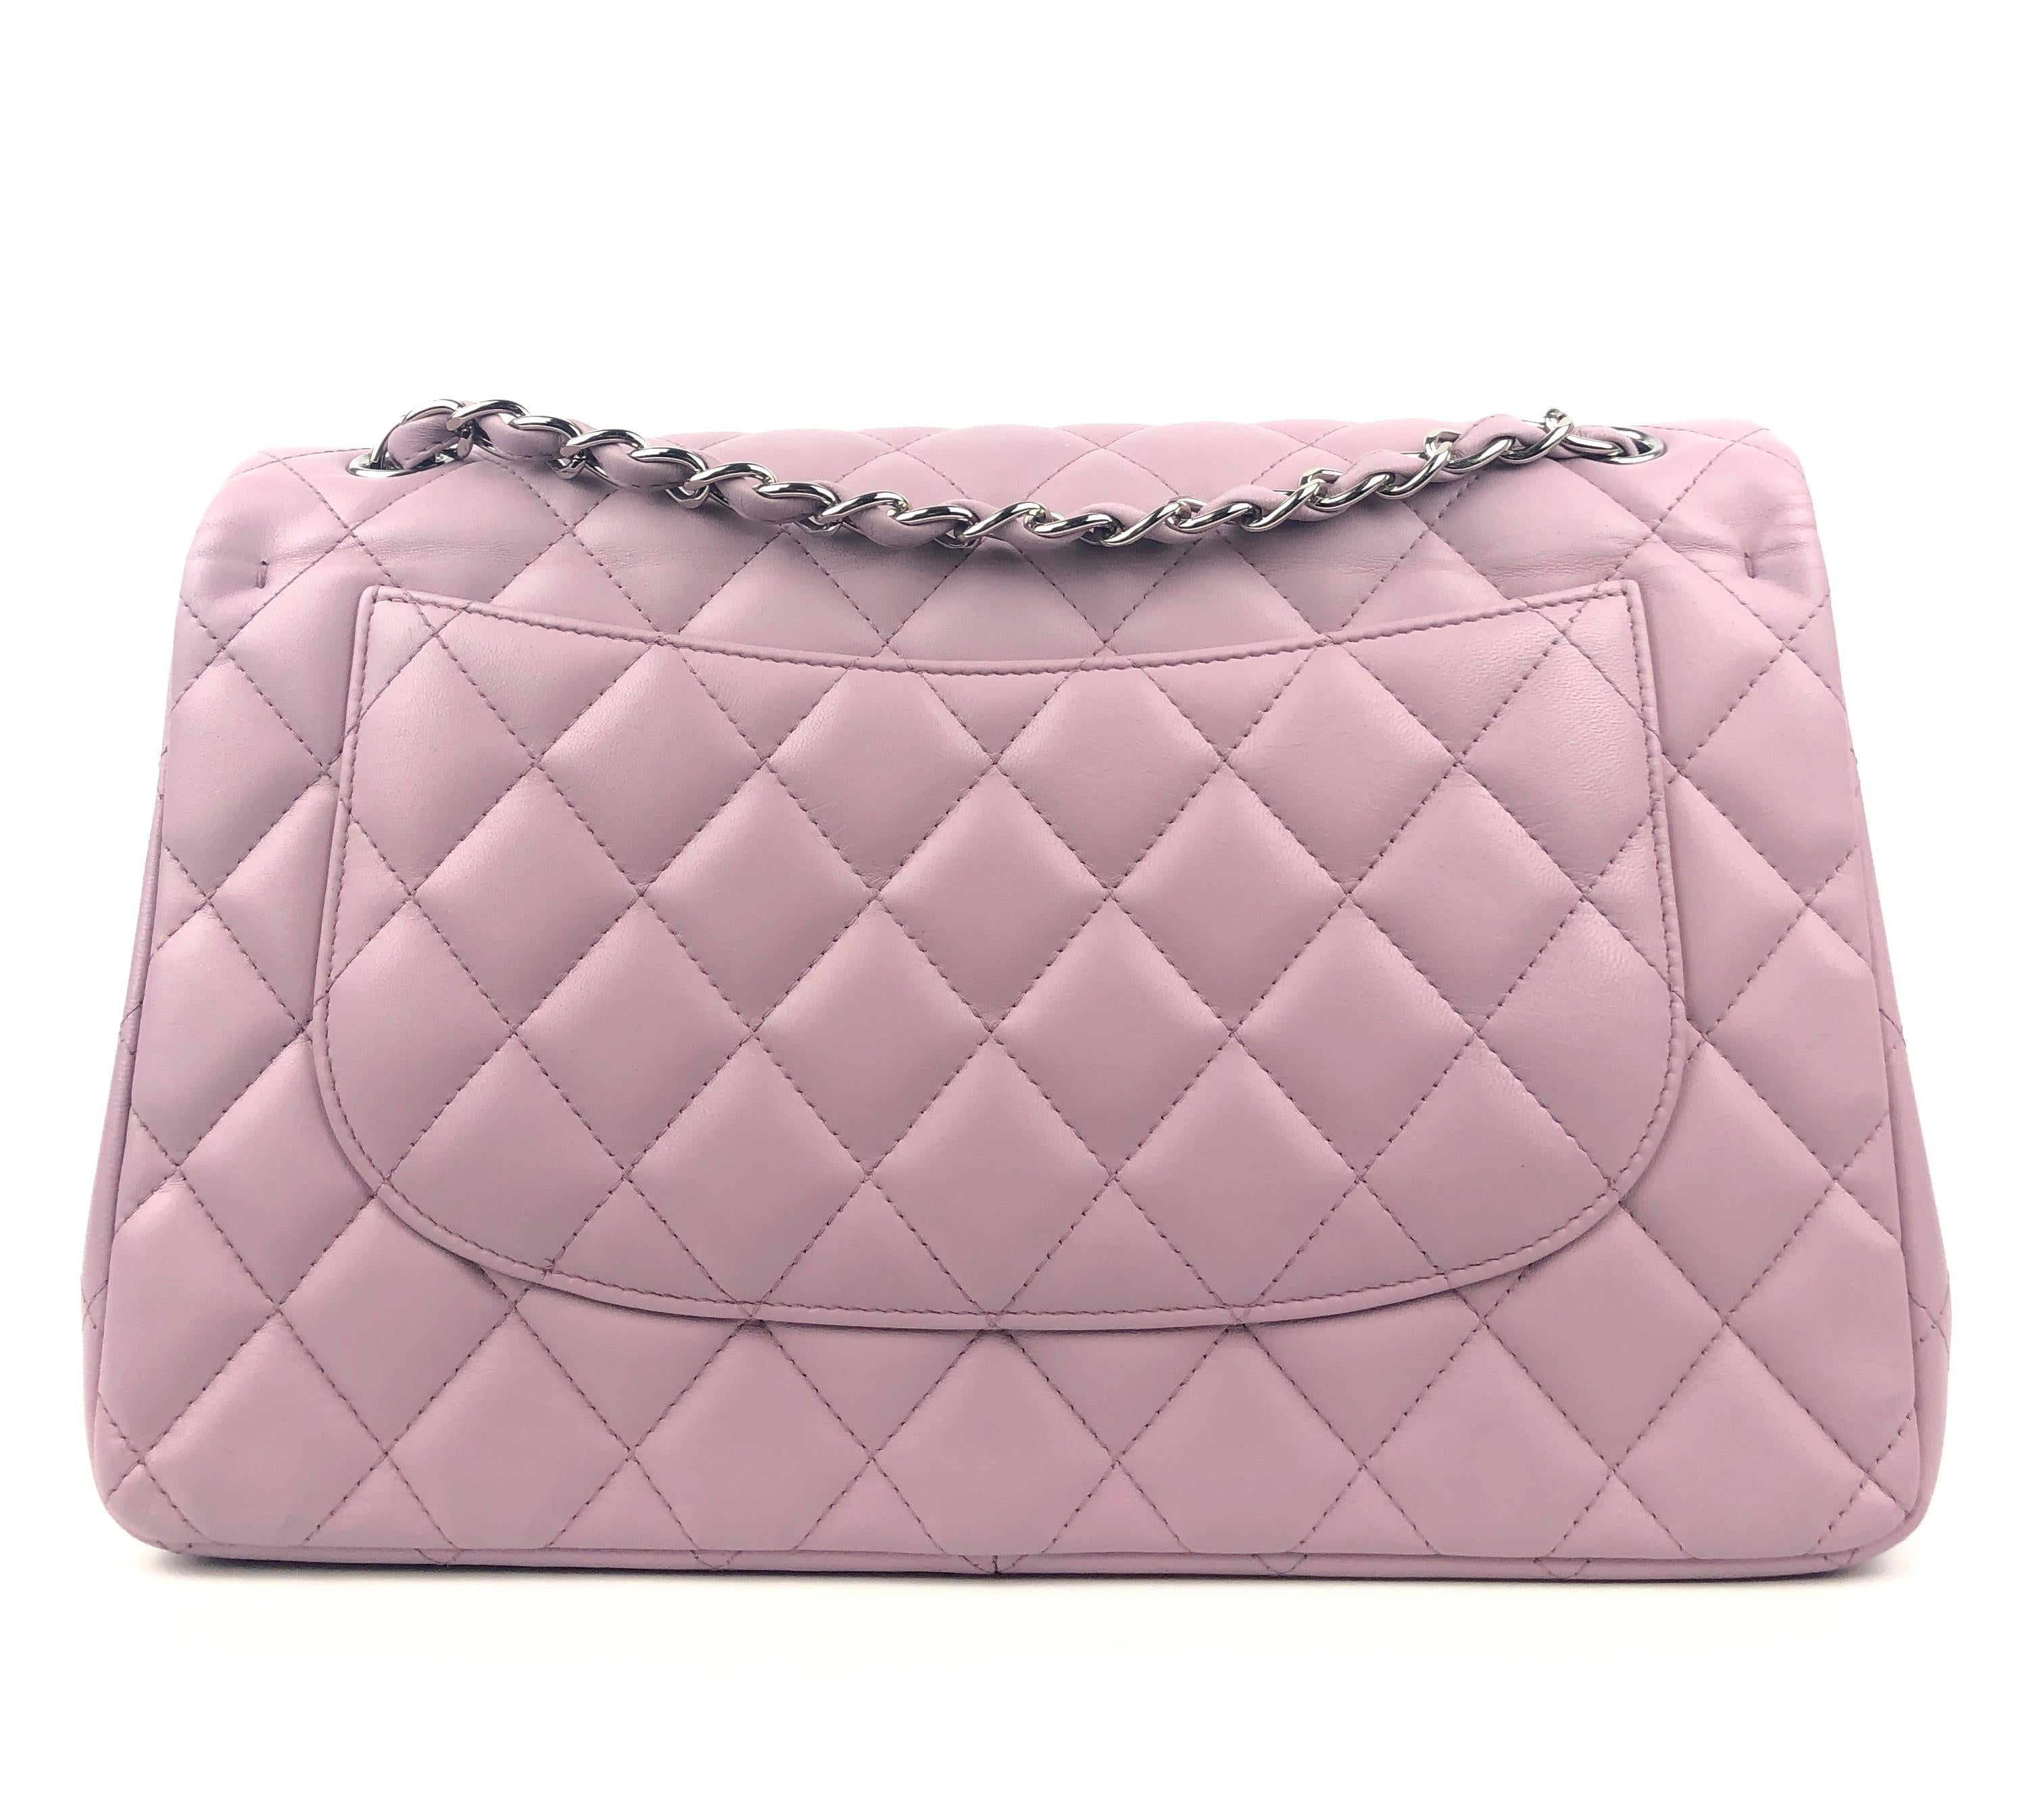 This authentic Chanel Lavender Lambskin Jumbo Classic Flap is in pristine condition.  The highly sought after Jumbo Classic is breathtaking in this feminine shade of soft lavender.
Quilted lambskin with silver tone interlocking CC twist lock on